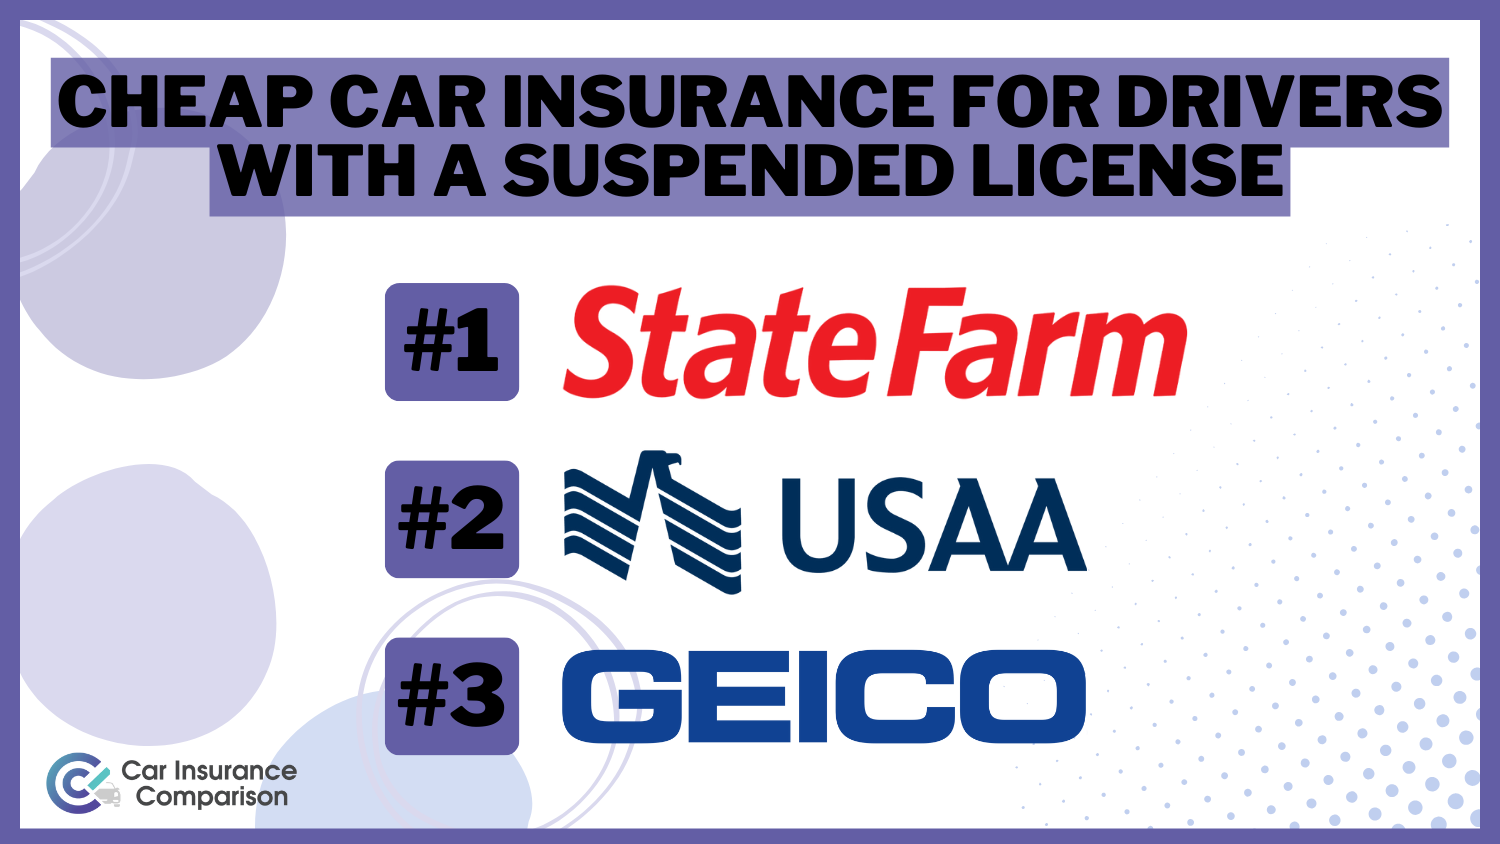 State Farm, USAA, and Geico are Cheap Car Insurance for Drivers With a Suspended License